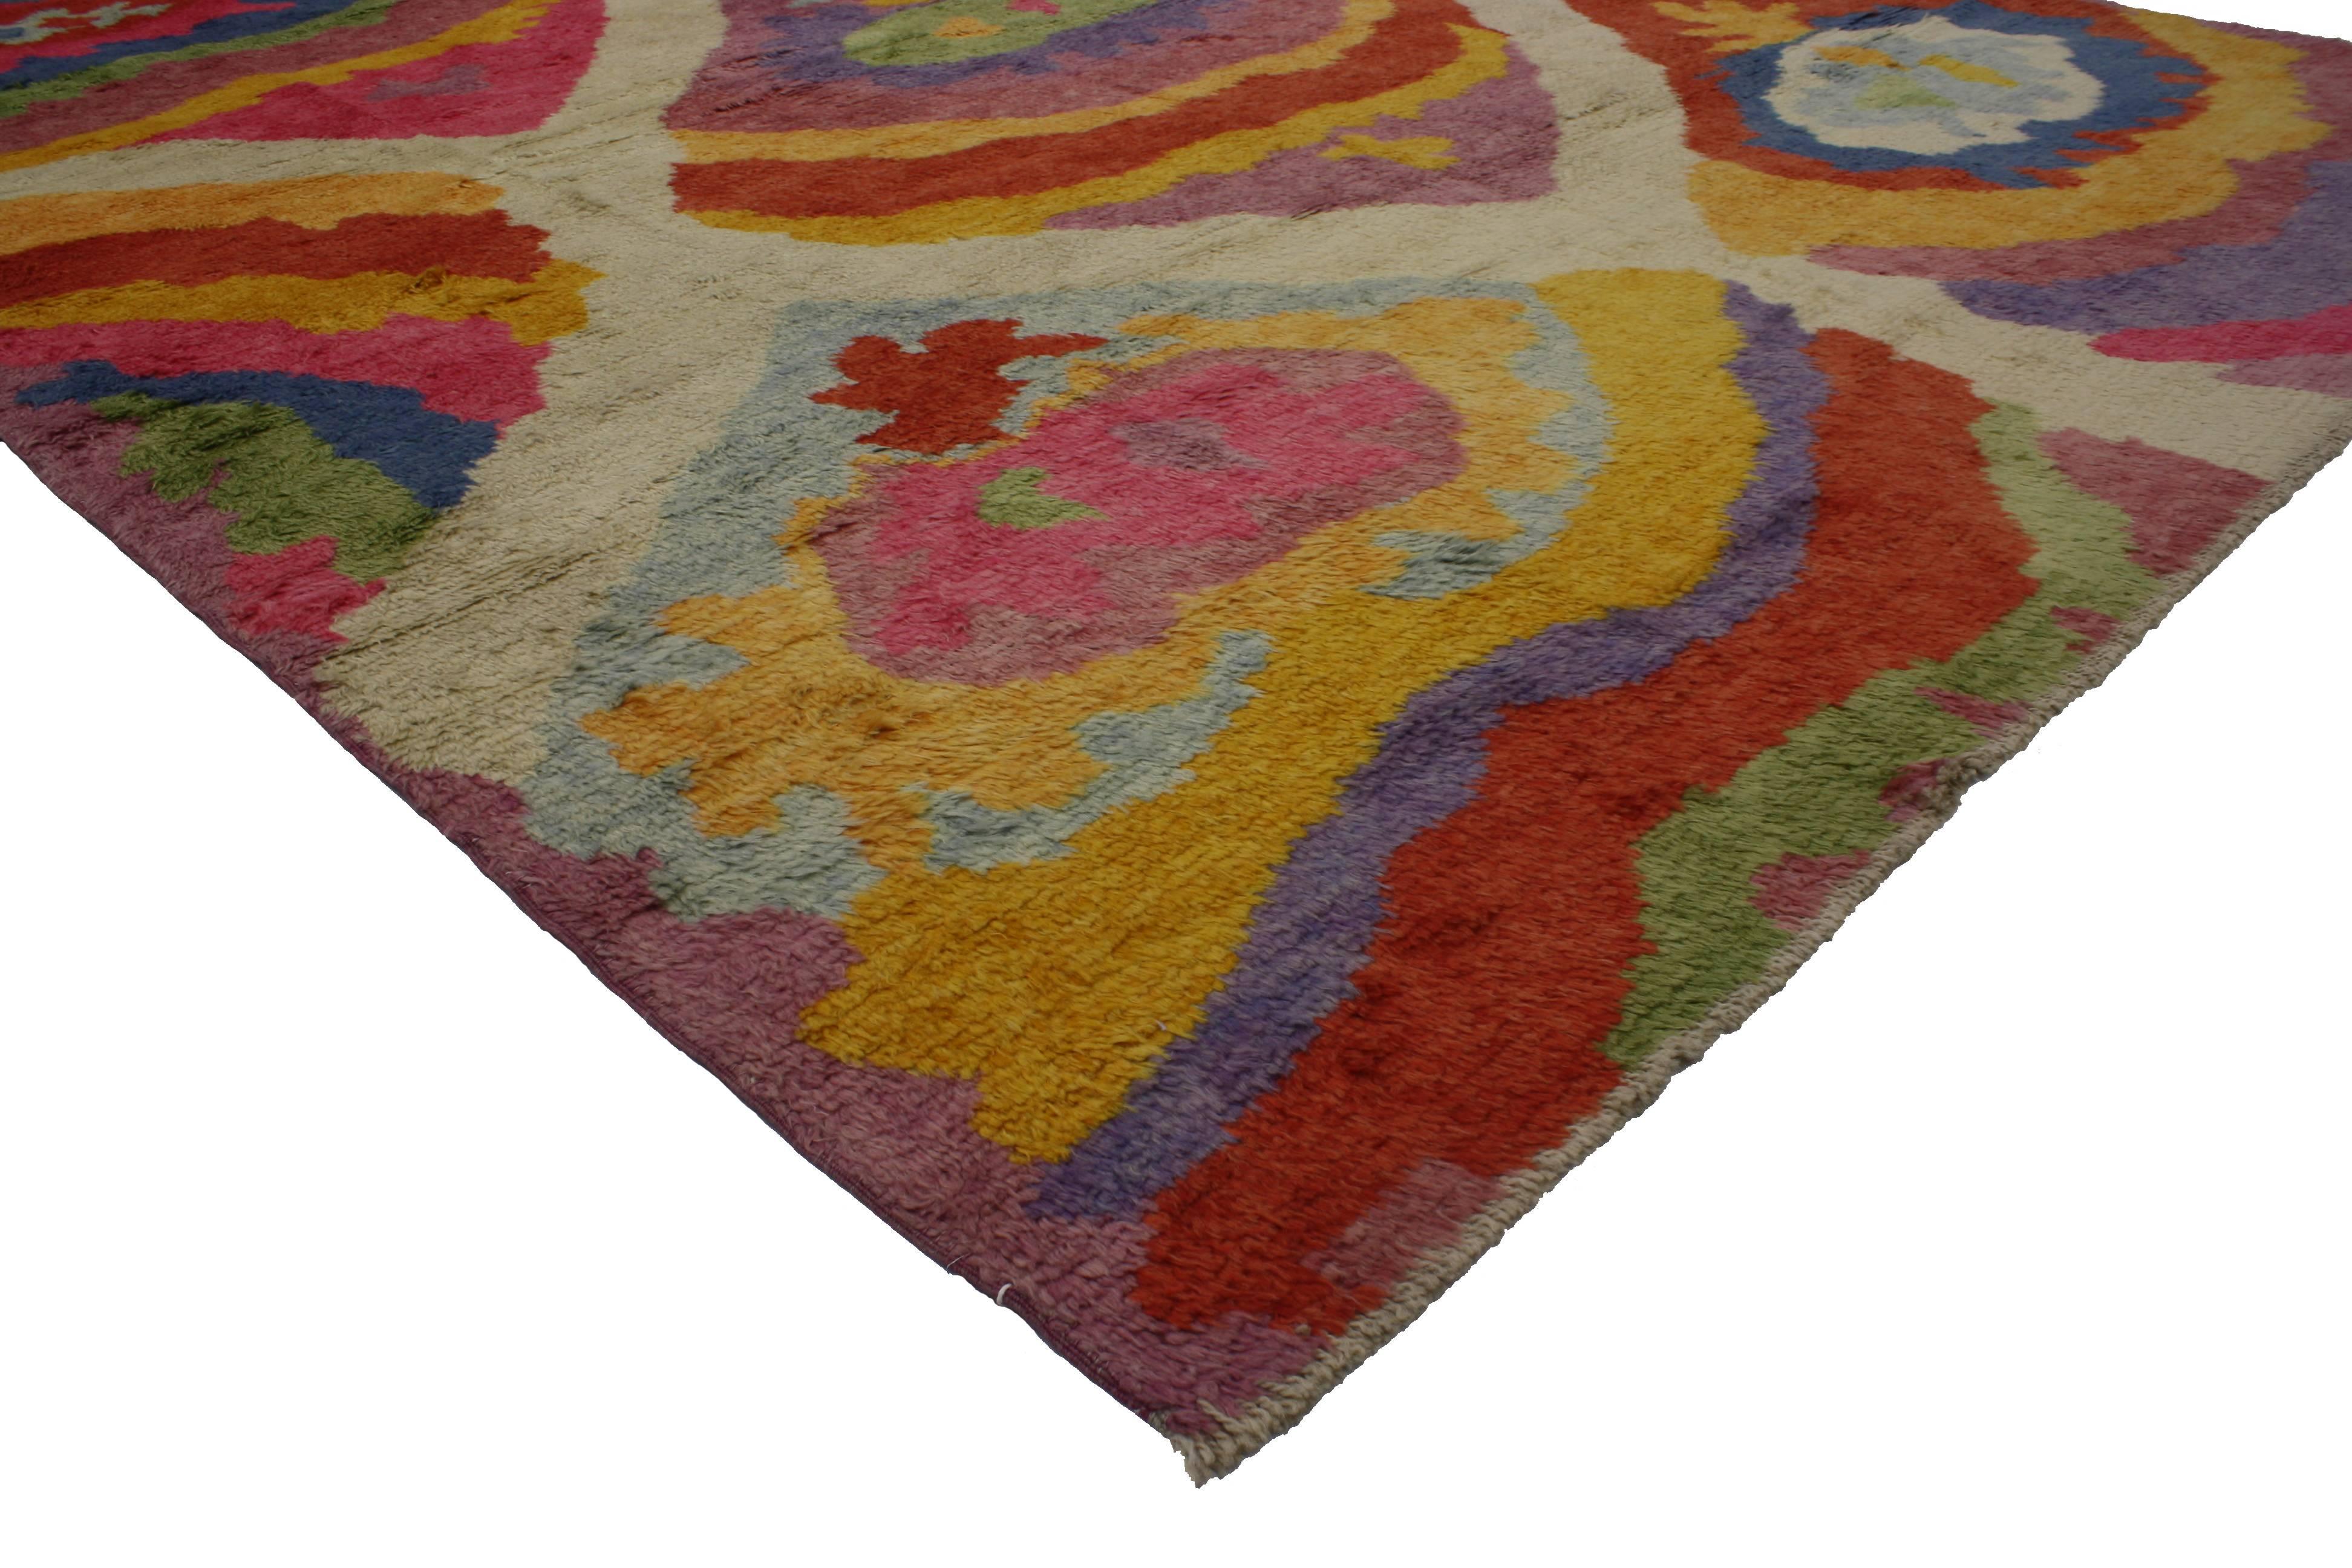 51864 new colorful contemporary Tulu Shag Area rug Inspired by Robert Delaunay. This hand knotted wool contemporary Tulu shag area rug with Postmodern style showcases an all-over adventurous geometric pattern composed of ambiguous organic shapes in